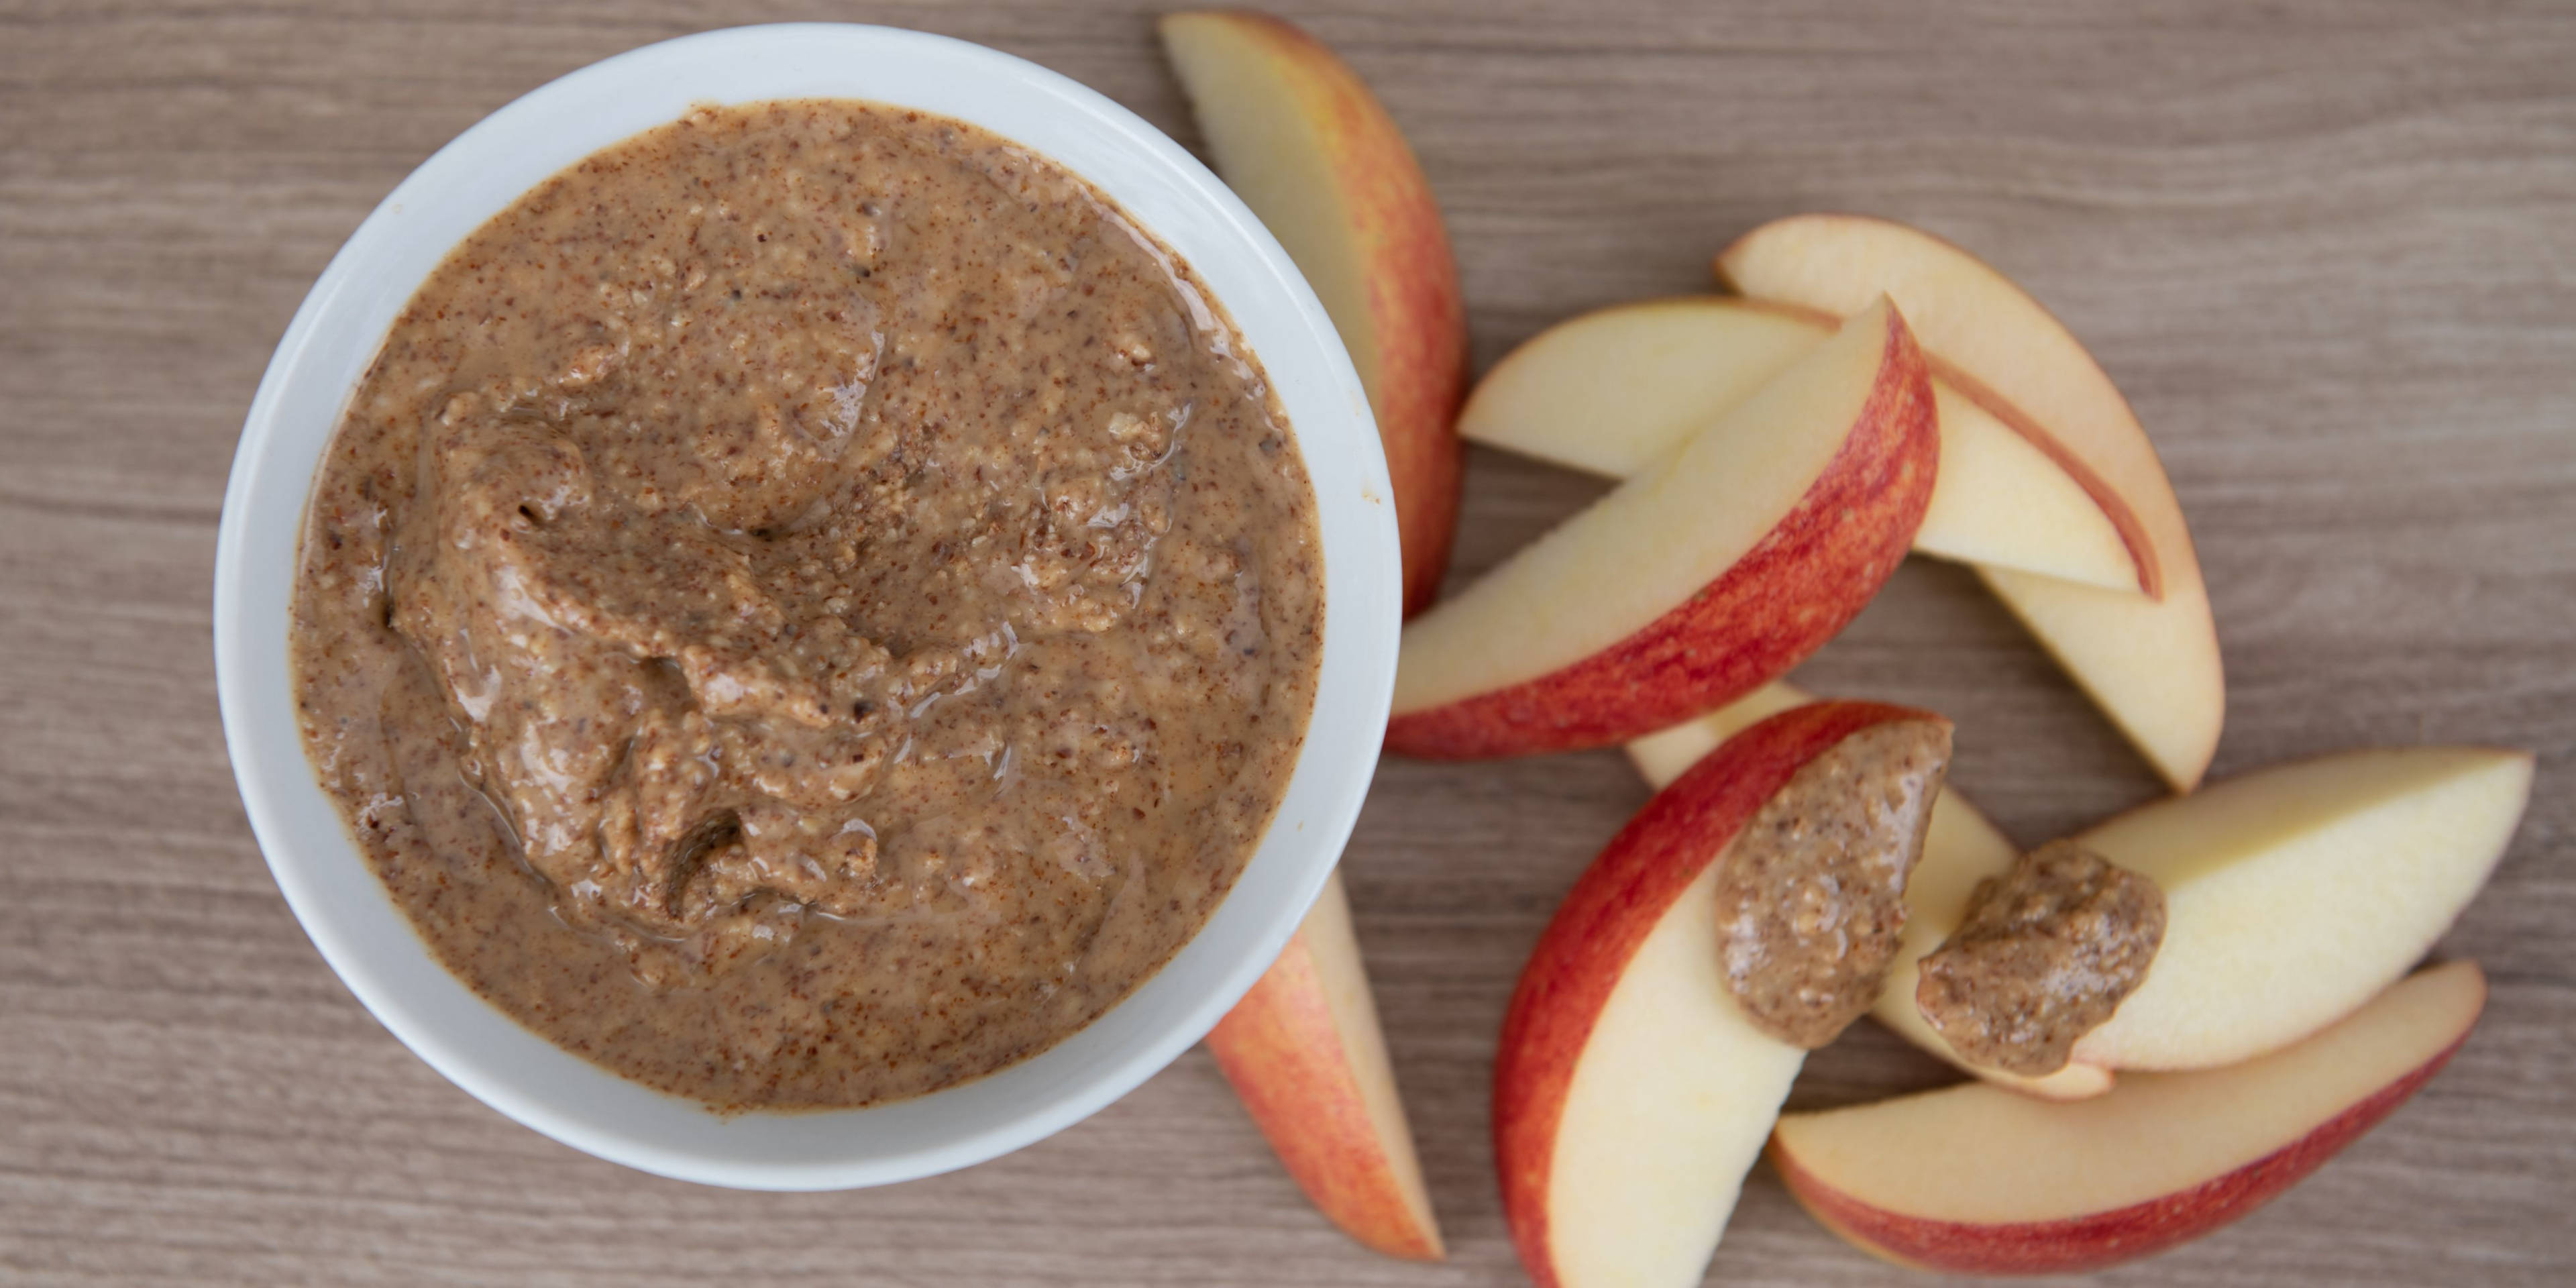 apples and almond butter